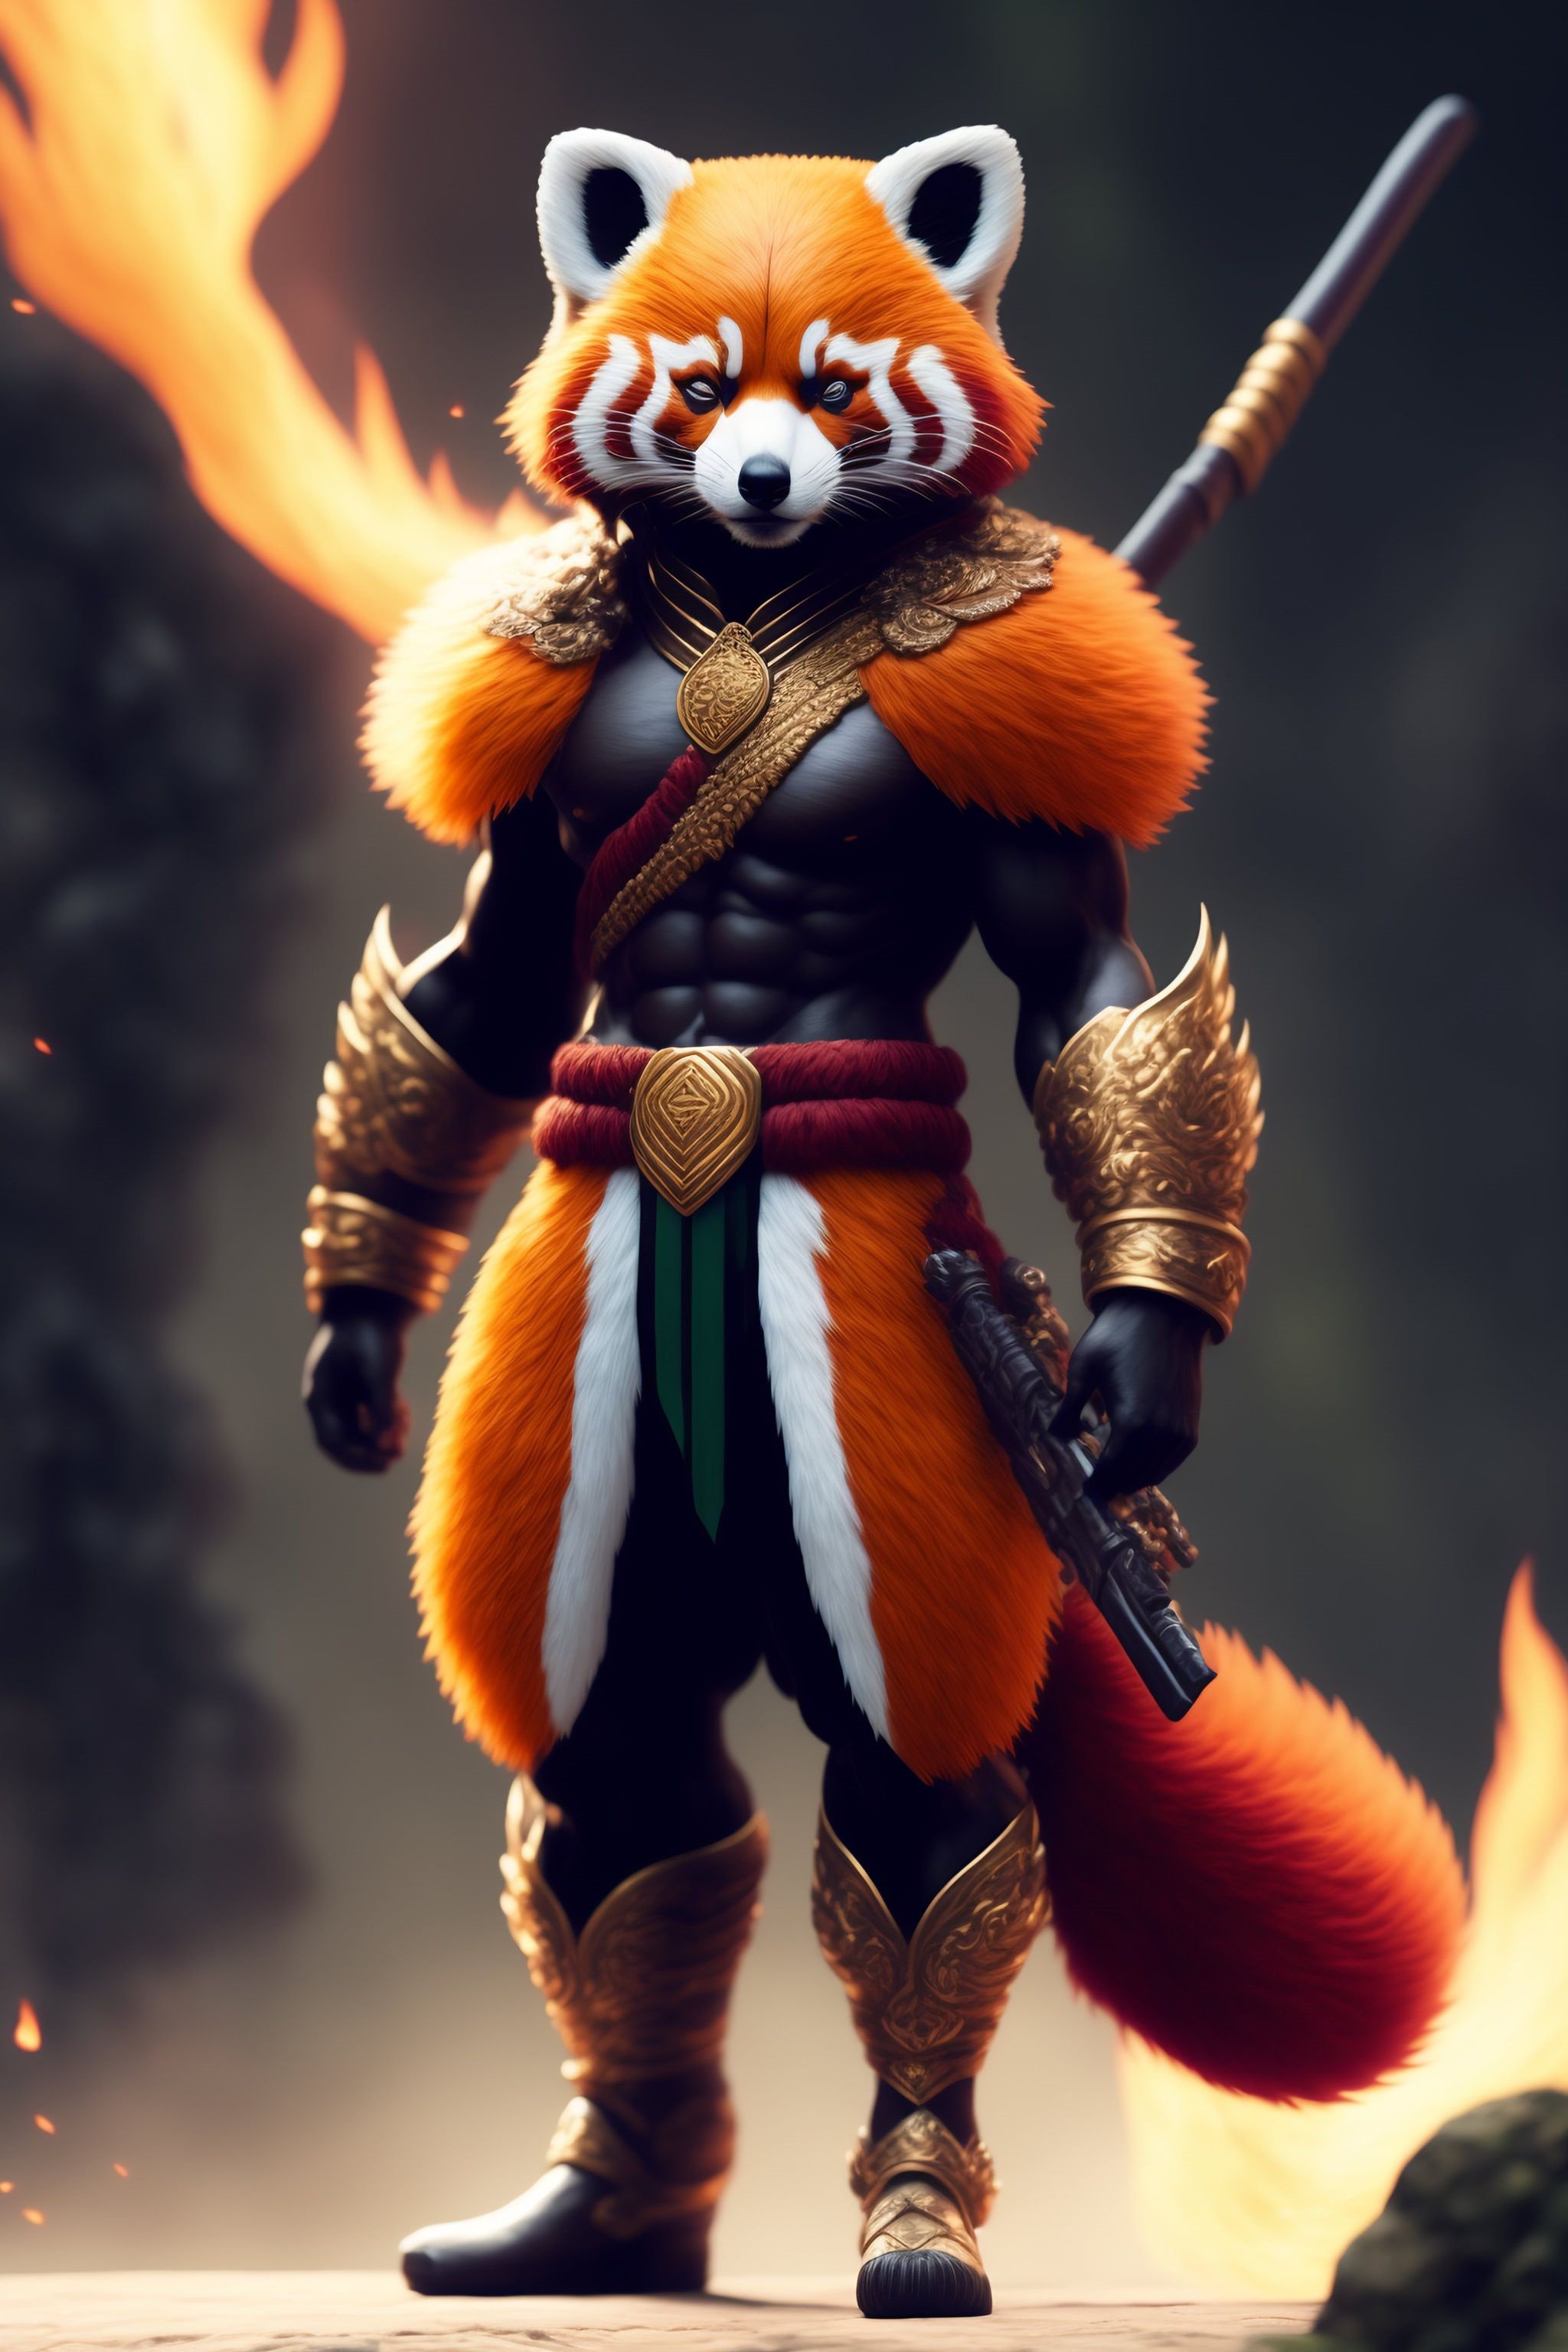 @behiver/red-panda-envisioned-as-a-firefox-or-splinterlands-art-contest-week-230